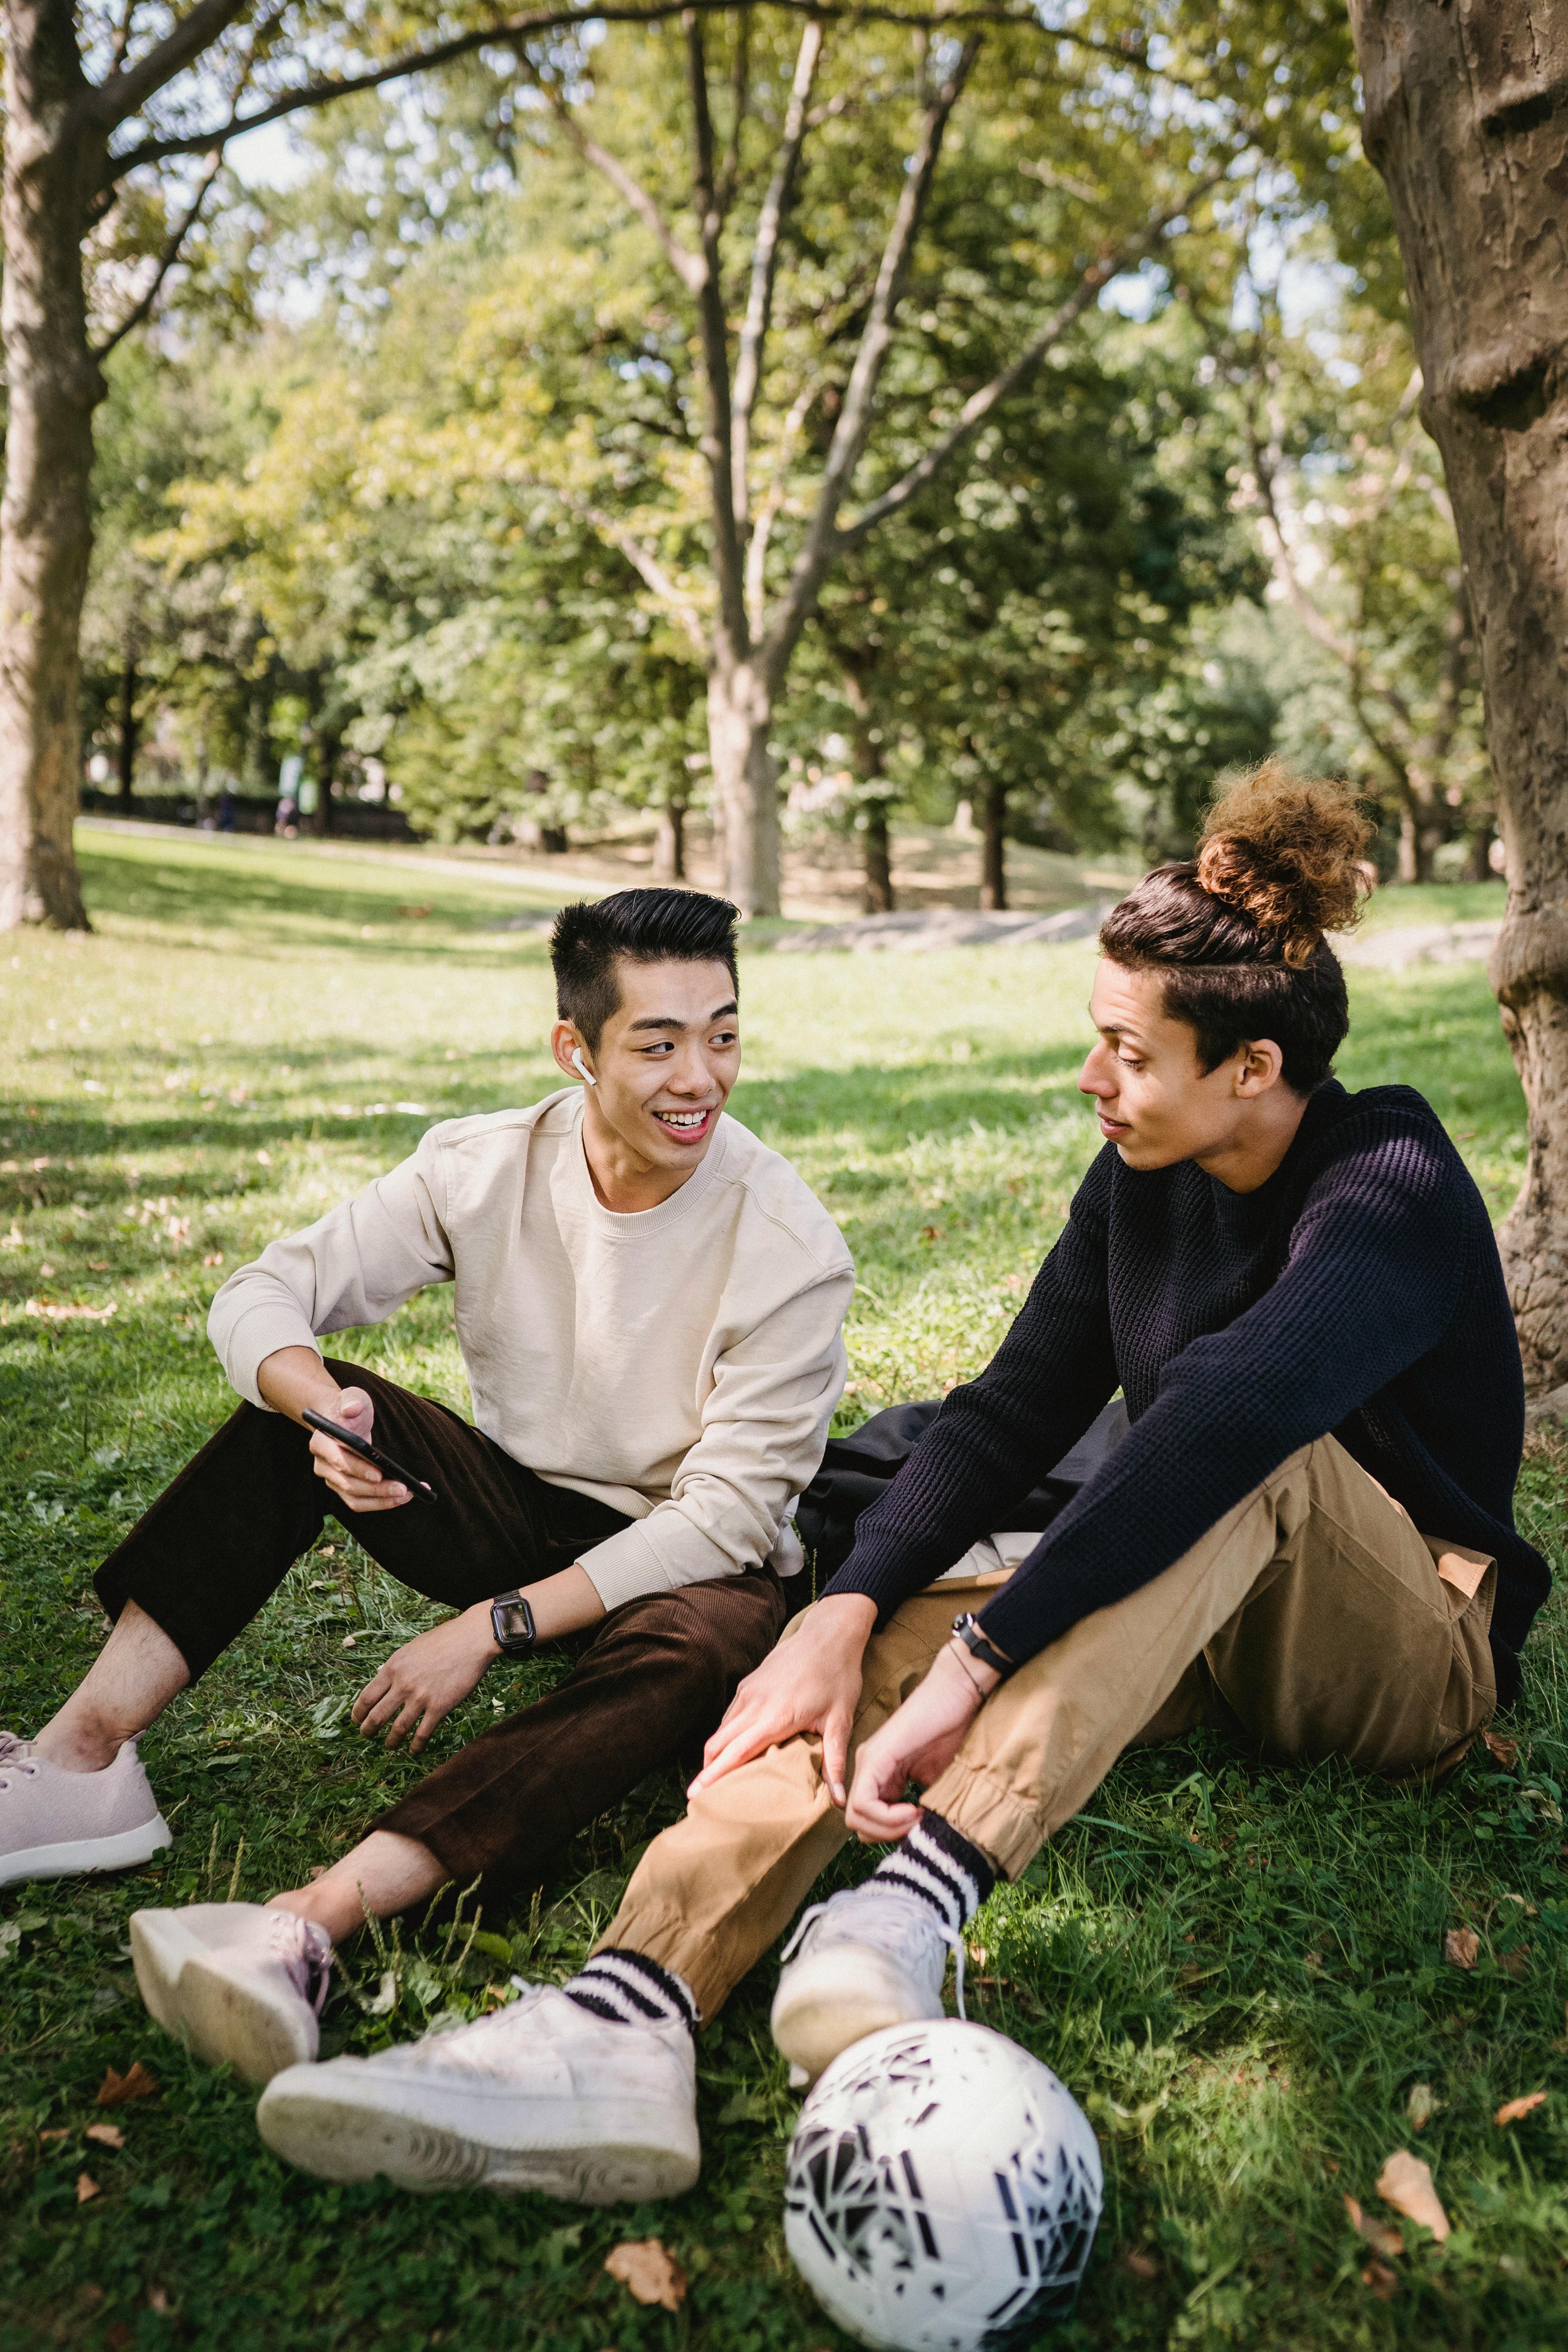 cheerful ethnic men chatting on lawn in park